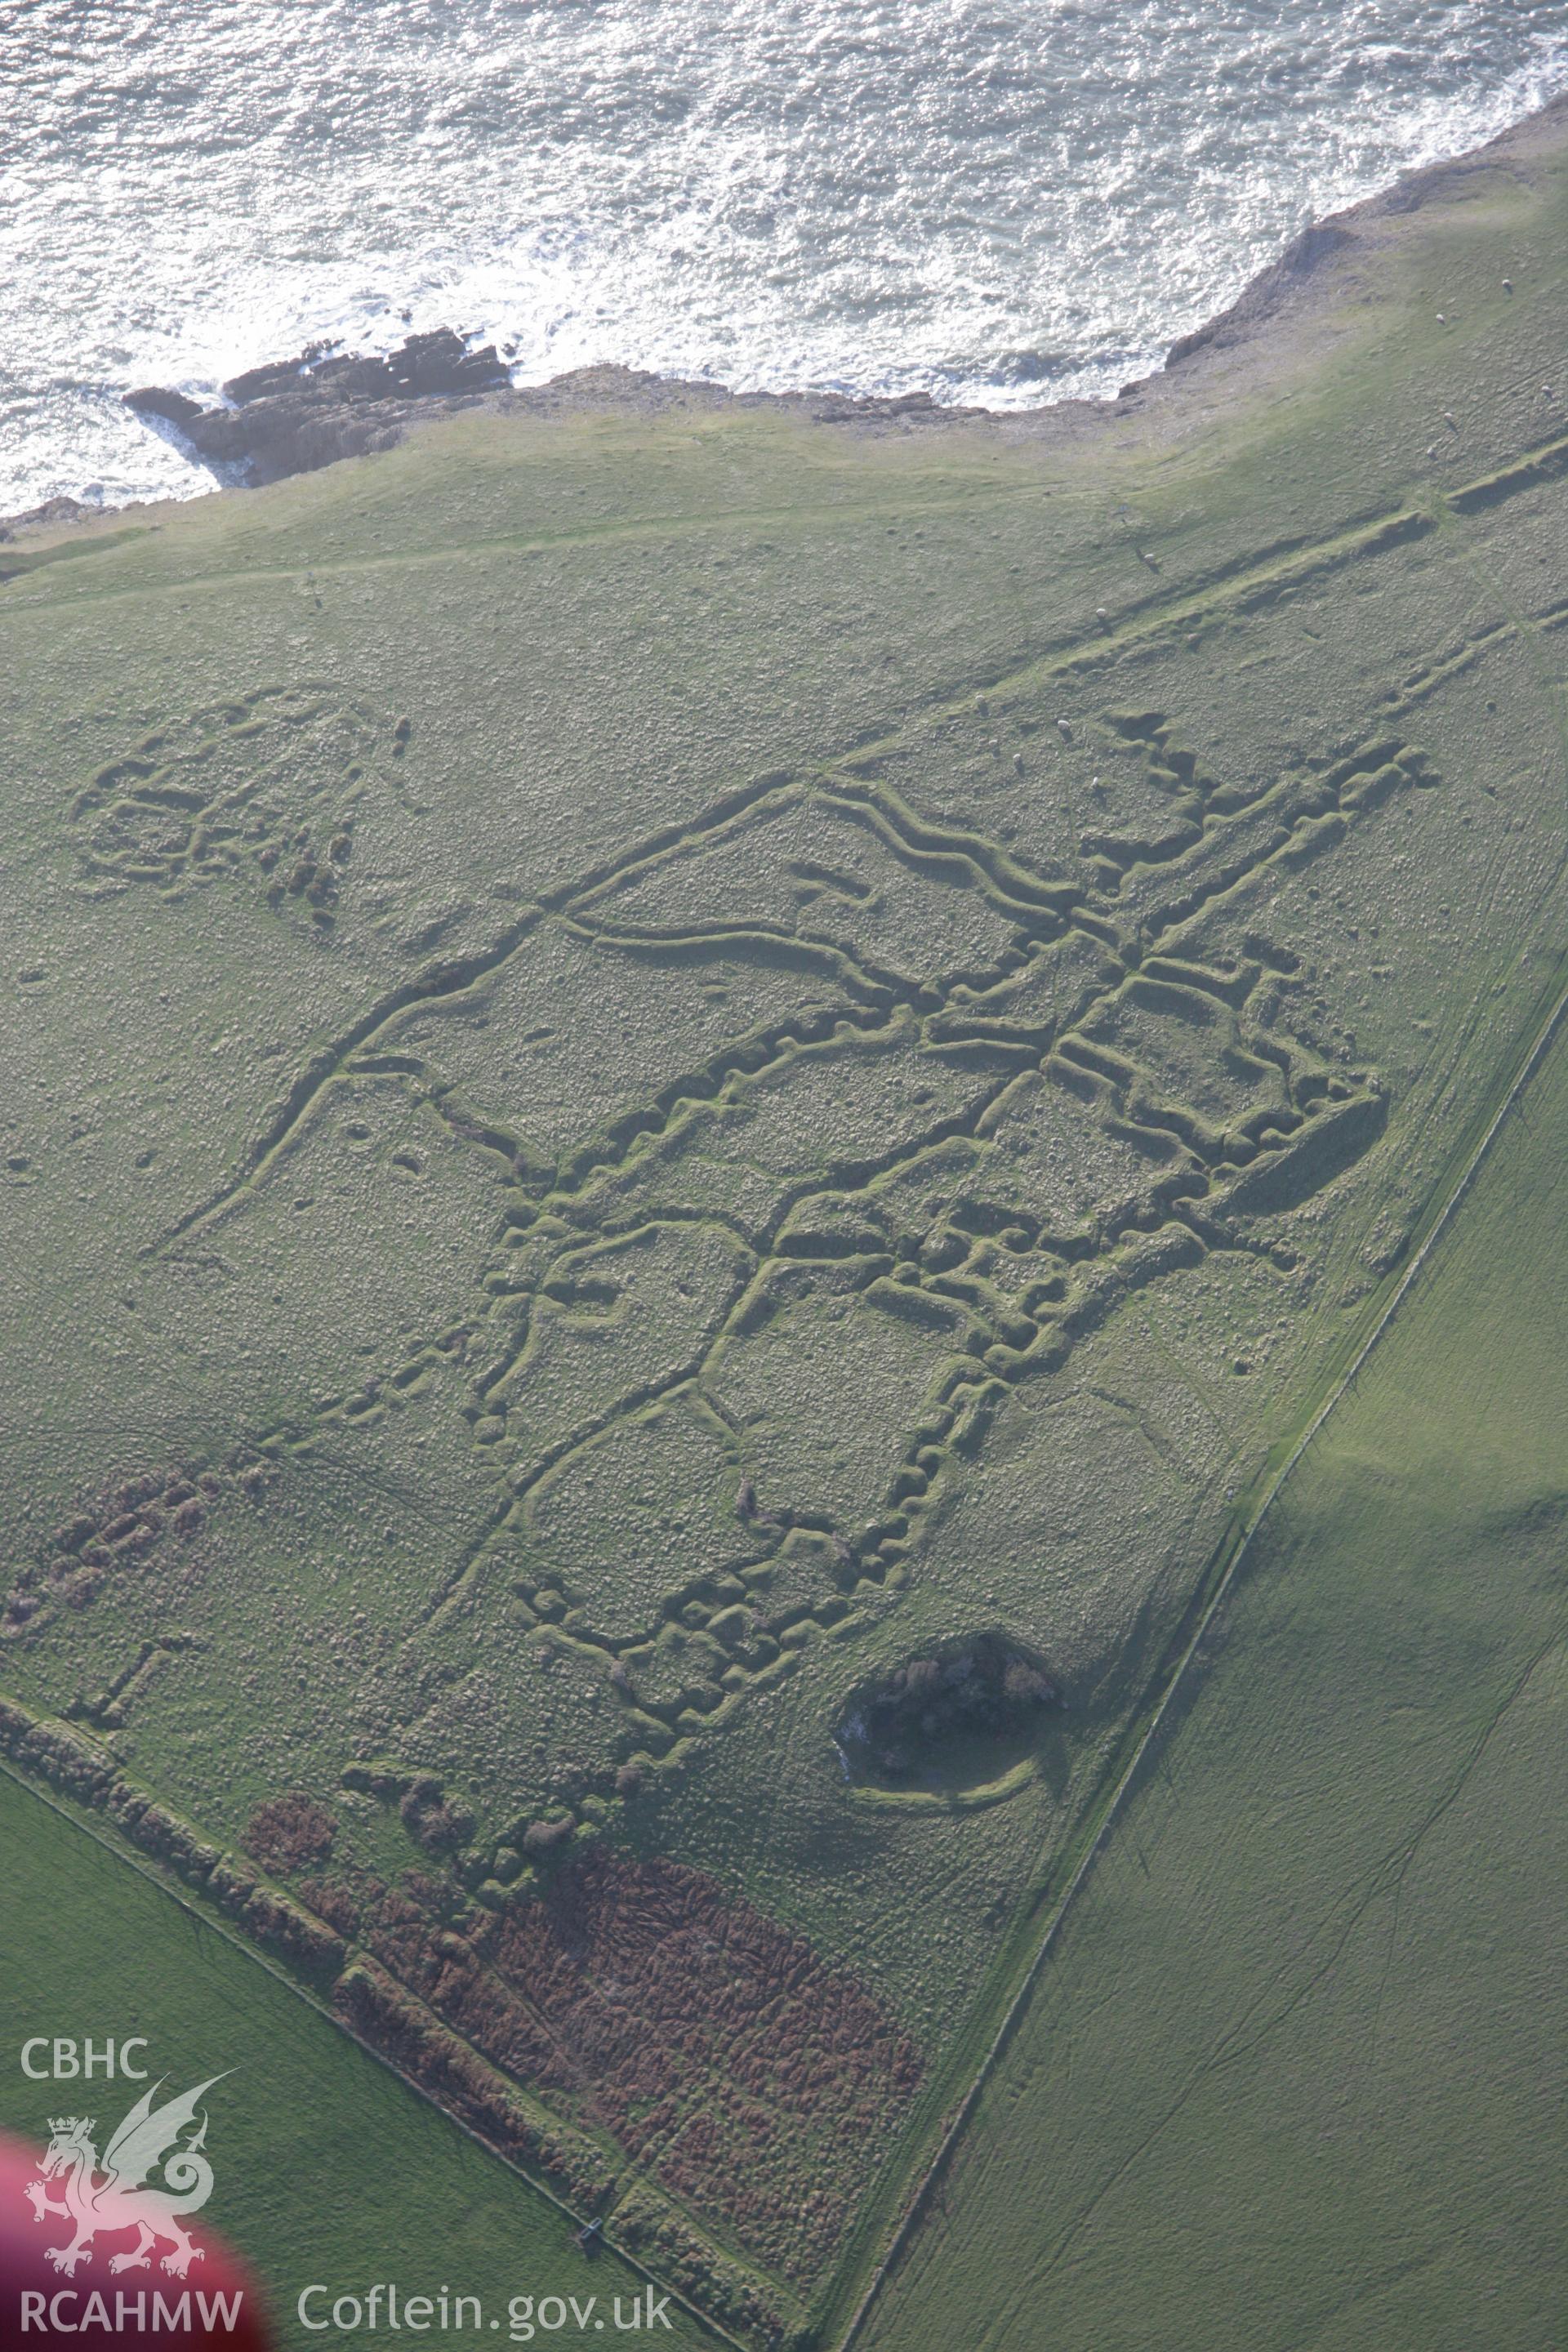 RCAHMW colour oblique aerial photograph of Penally First World War Practice Trenches, viewed from the north-east. Taken on 11 January 2006 by Toby Driver.